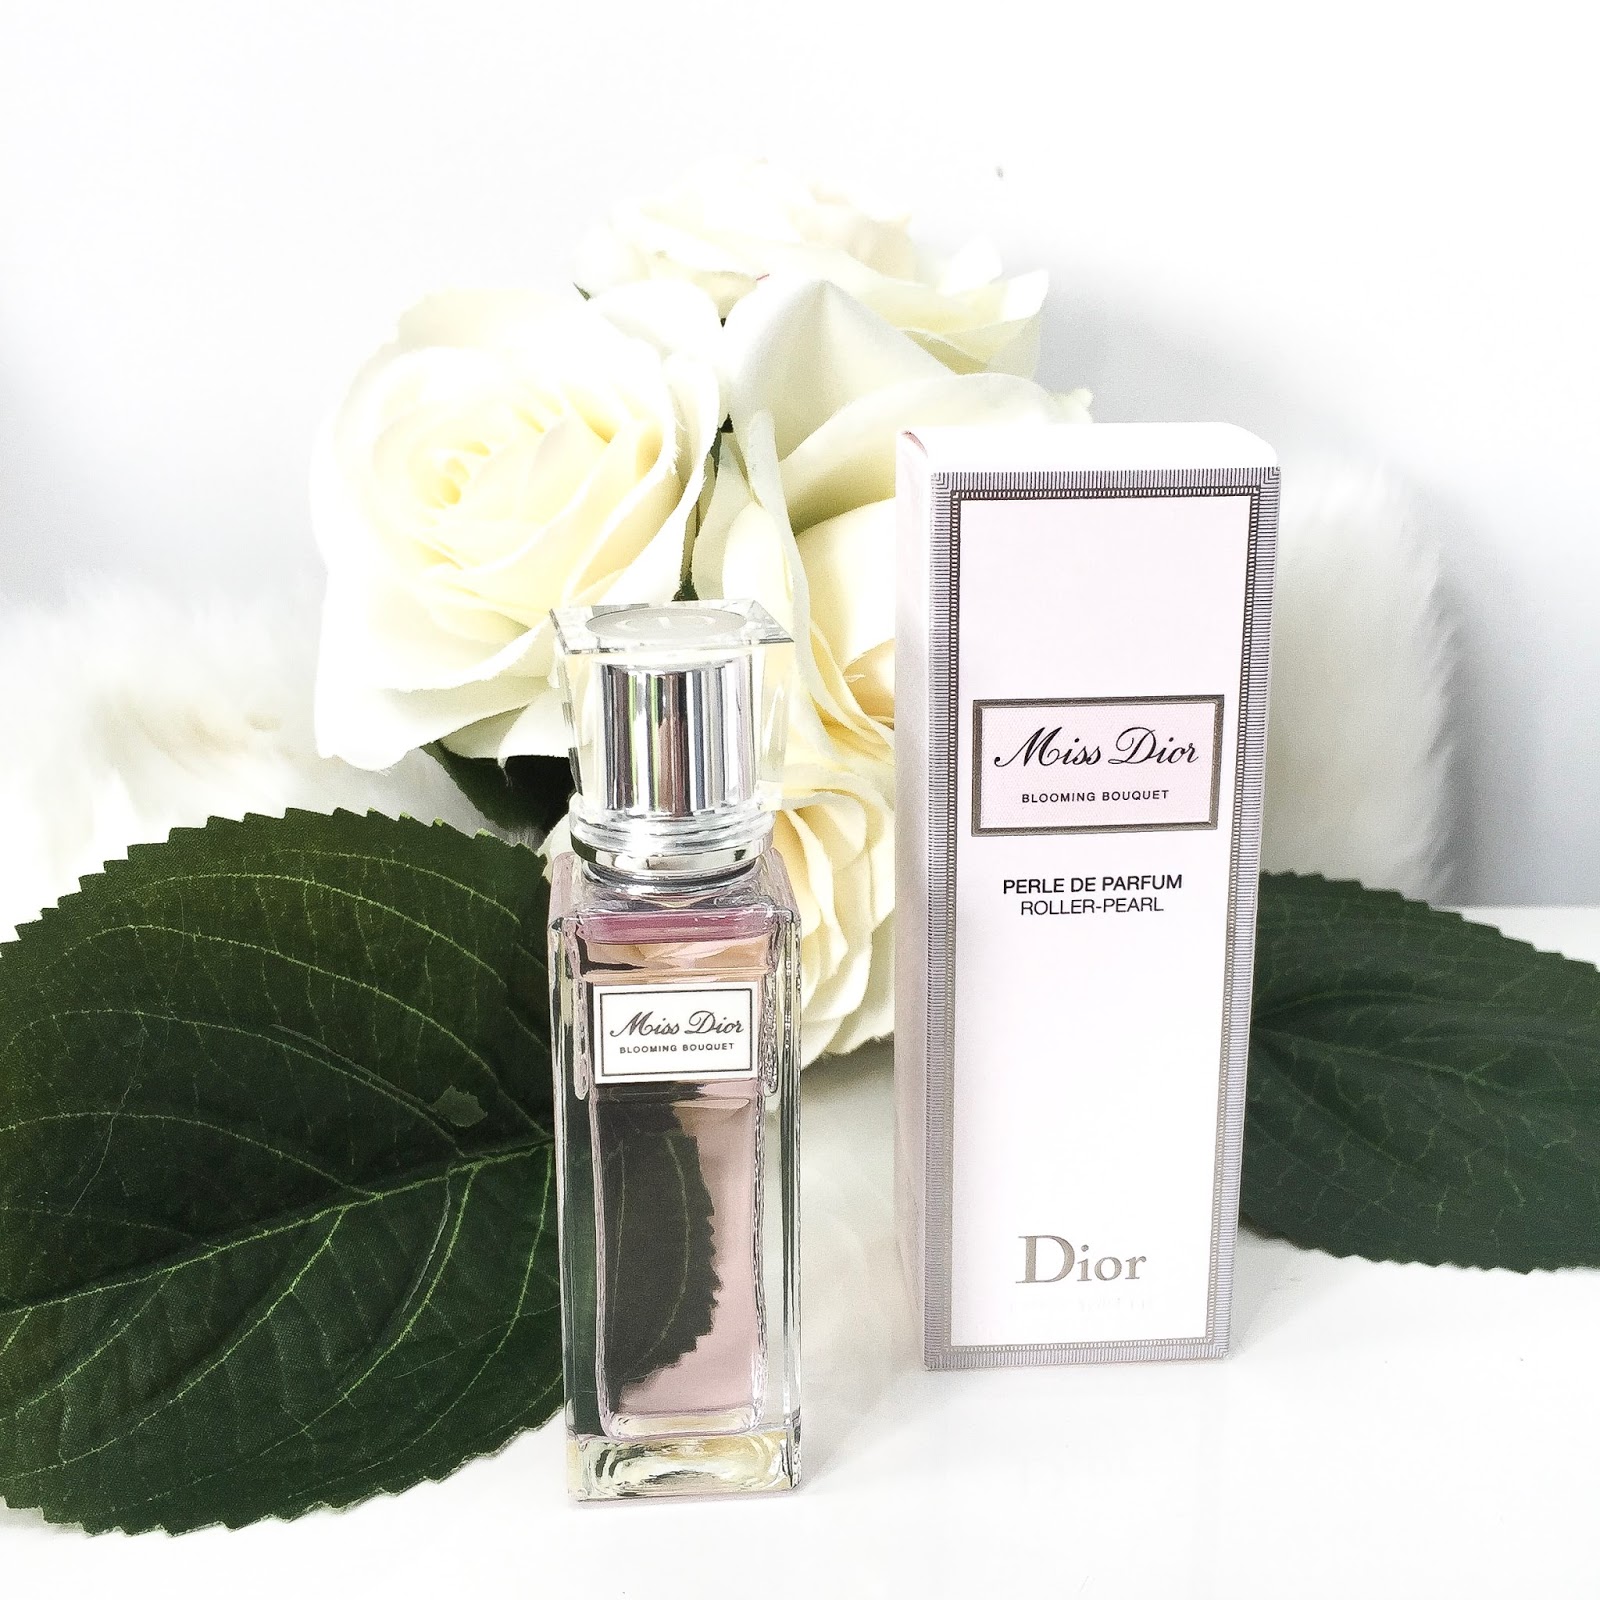 Love blooming pear. Miss Dior Blooming Bouquet 20ml. Dior Miss Dior Blooming Bouquet Roller-Pearl EDT 20ml. Miss Dior Eau 20 ml. Dior Miss Dior Blooming Bouquet 20 мл.